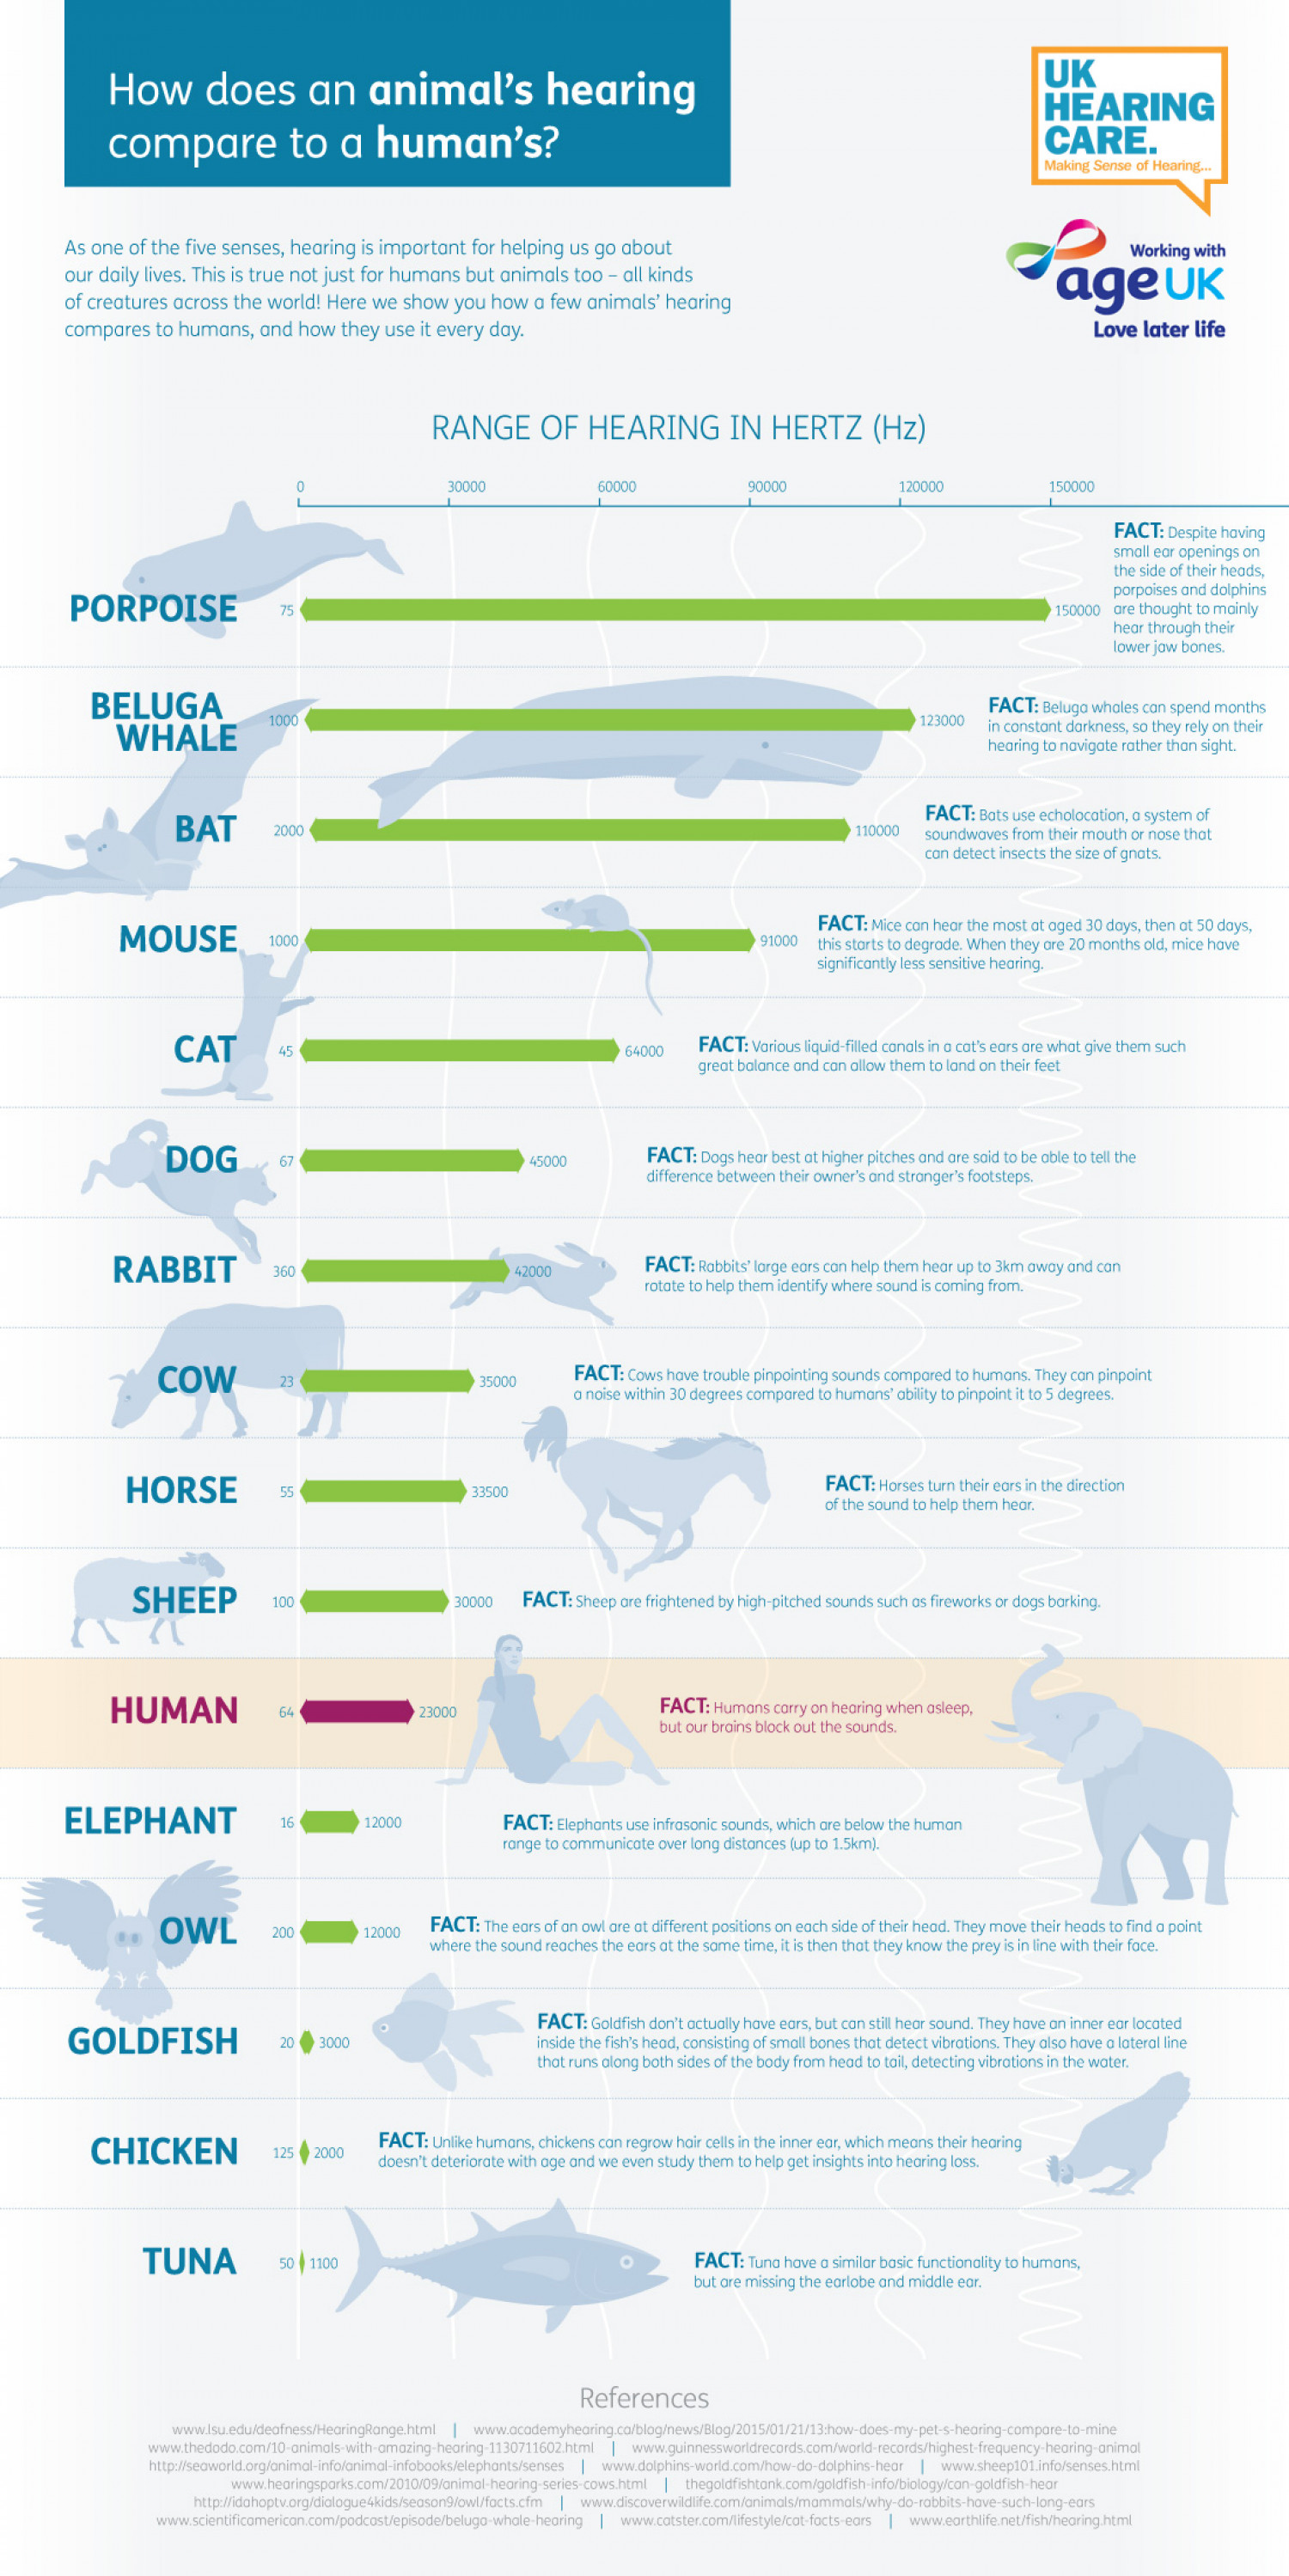 What is the difference between human and animal hearing ranges?